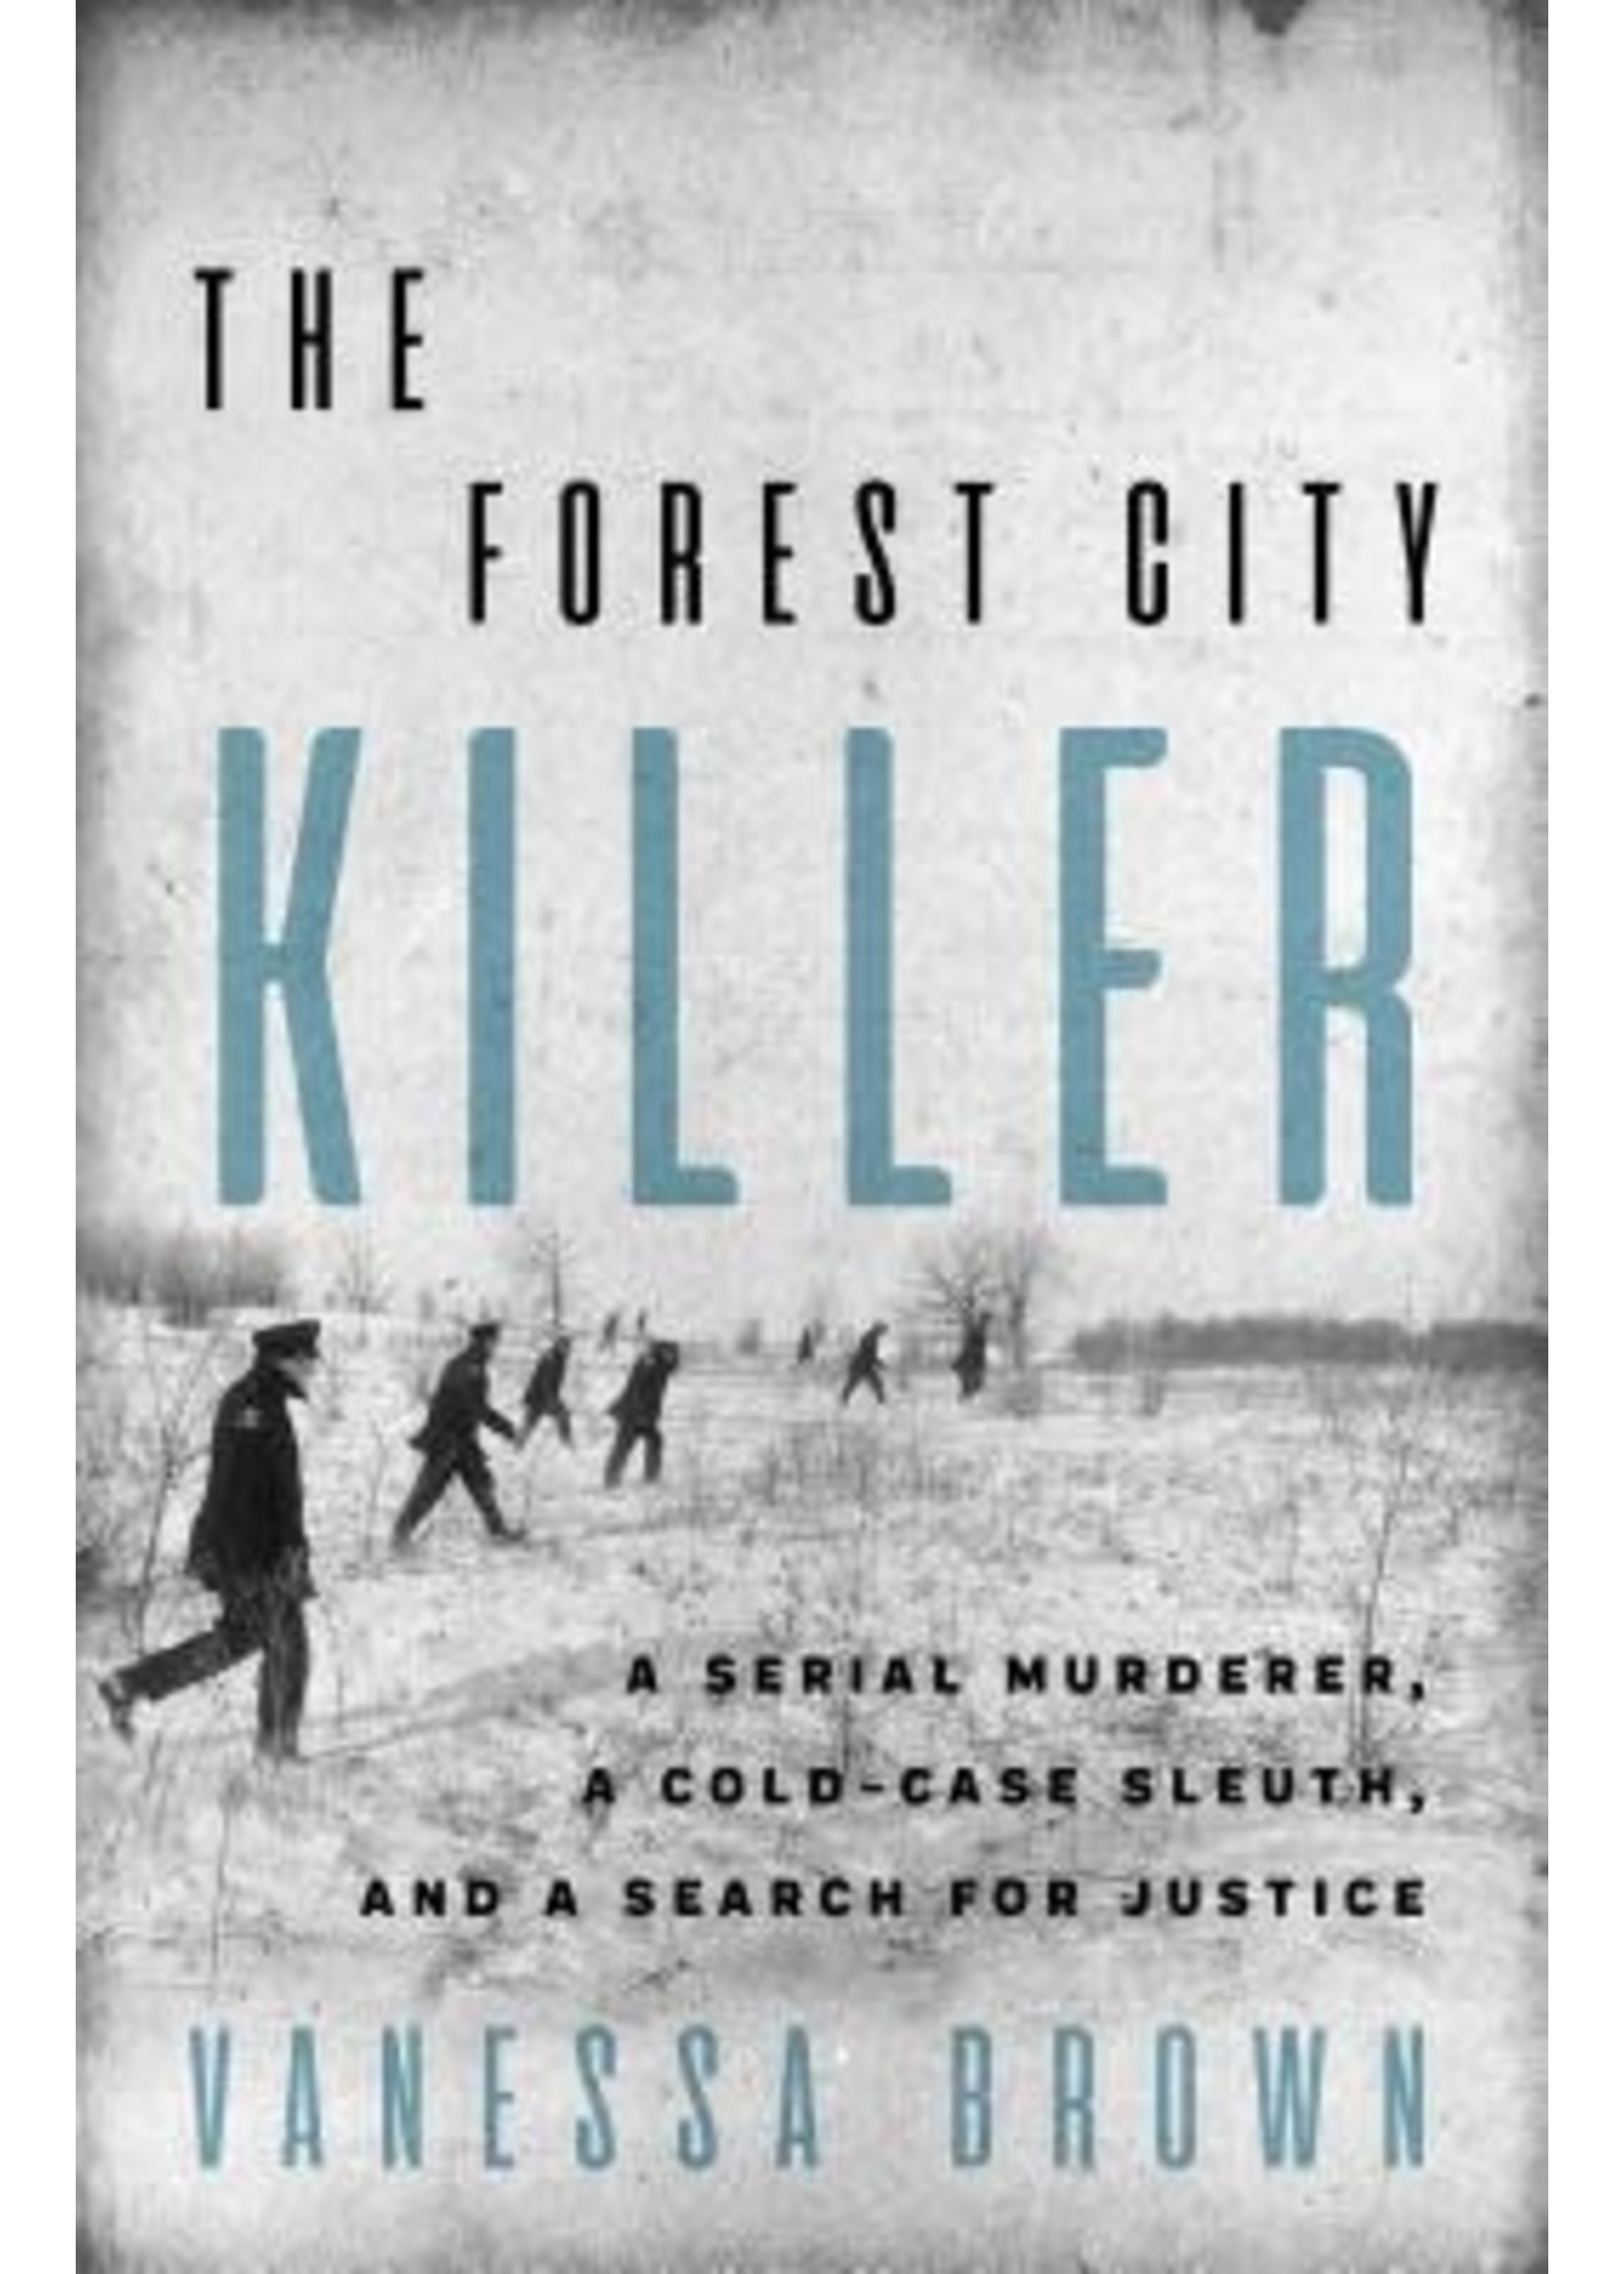 The Forest City Killer: A Serial Murderer, a Cold-Case Sleuth, and a Search for Justice by Vanessa Brown